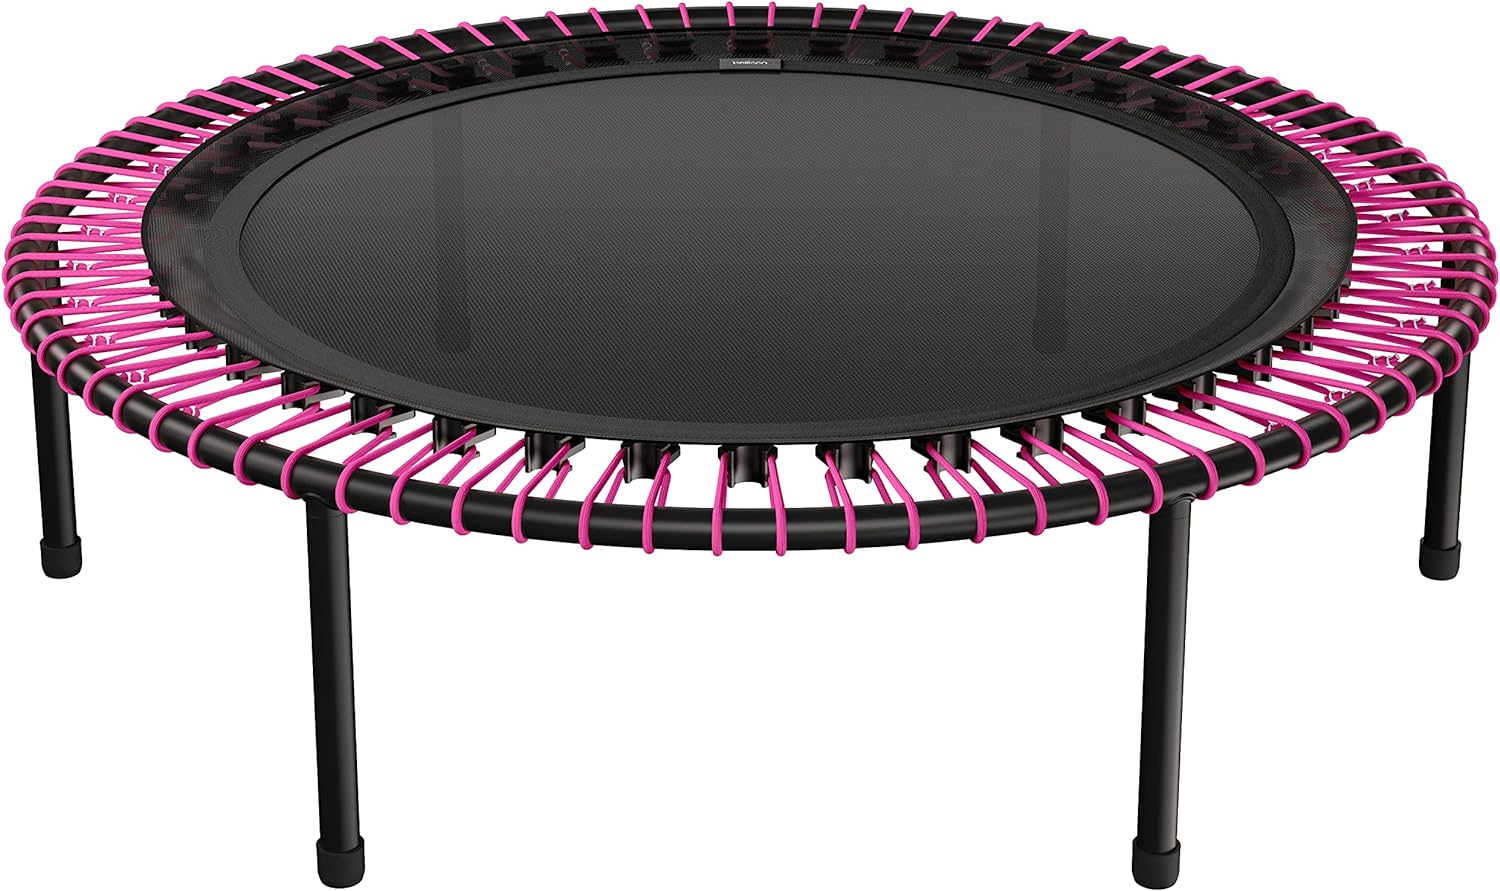 Bellicon Classic 100 Trampoline Folding Legs Rebounder Fitness Exercise Workout Indoor Trampoline Low-Impact Exercise Cardio Balance Mini Trampoline Bungee Cord Suspension Compact Design